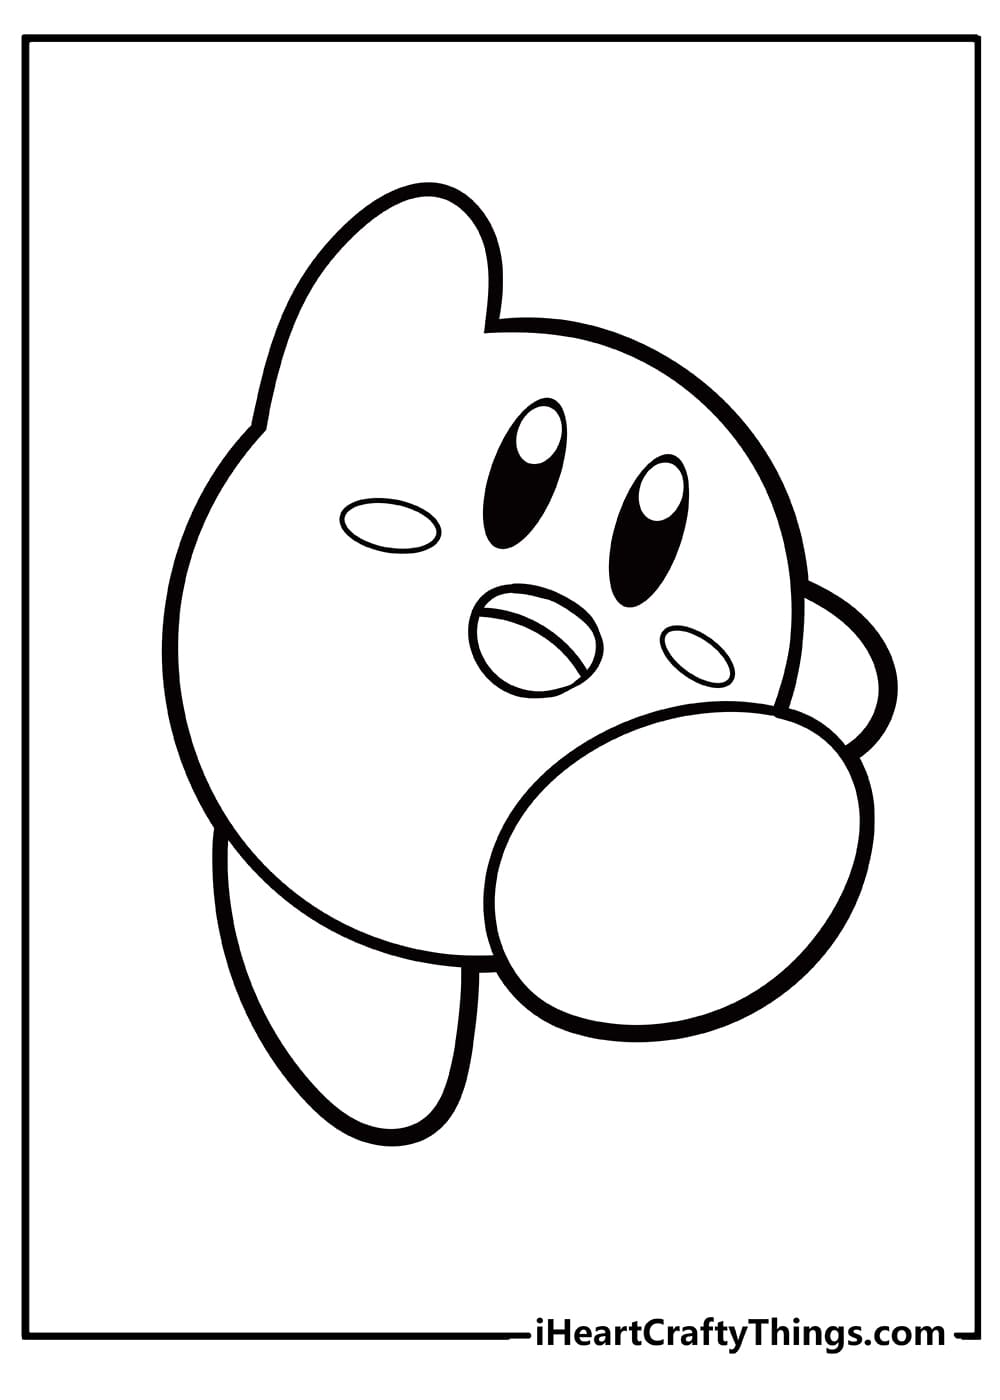 Kirby Image For Kids Coloring Page